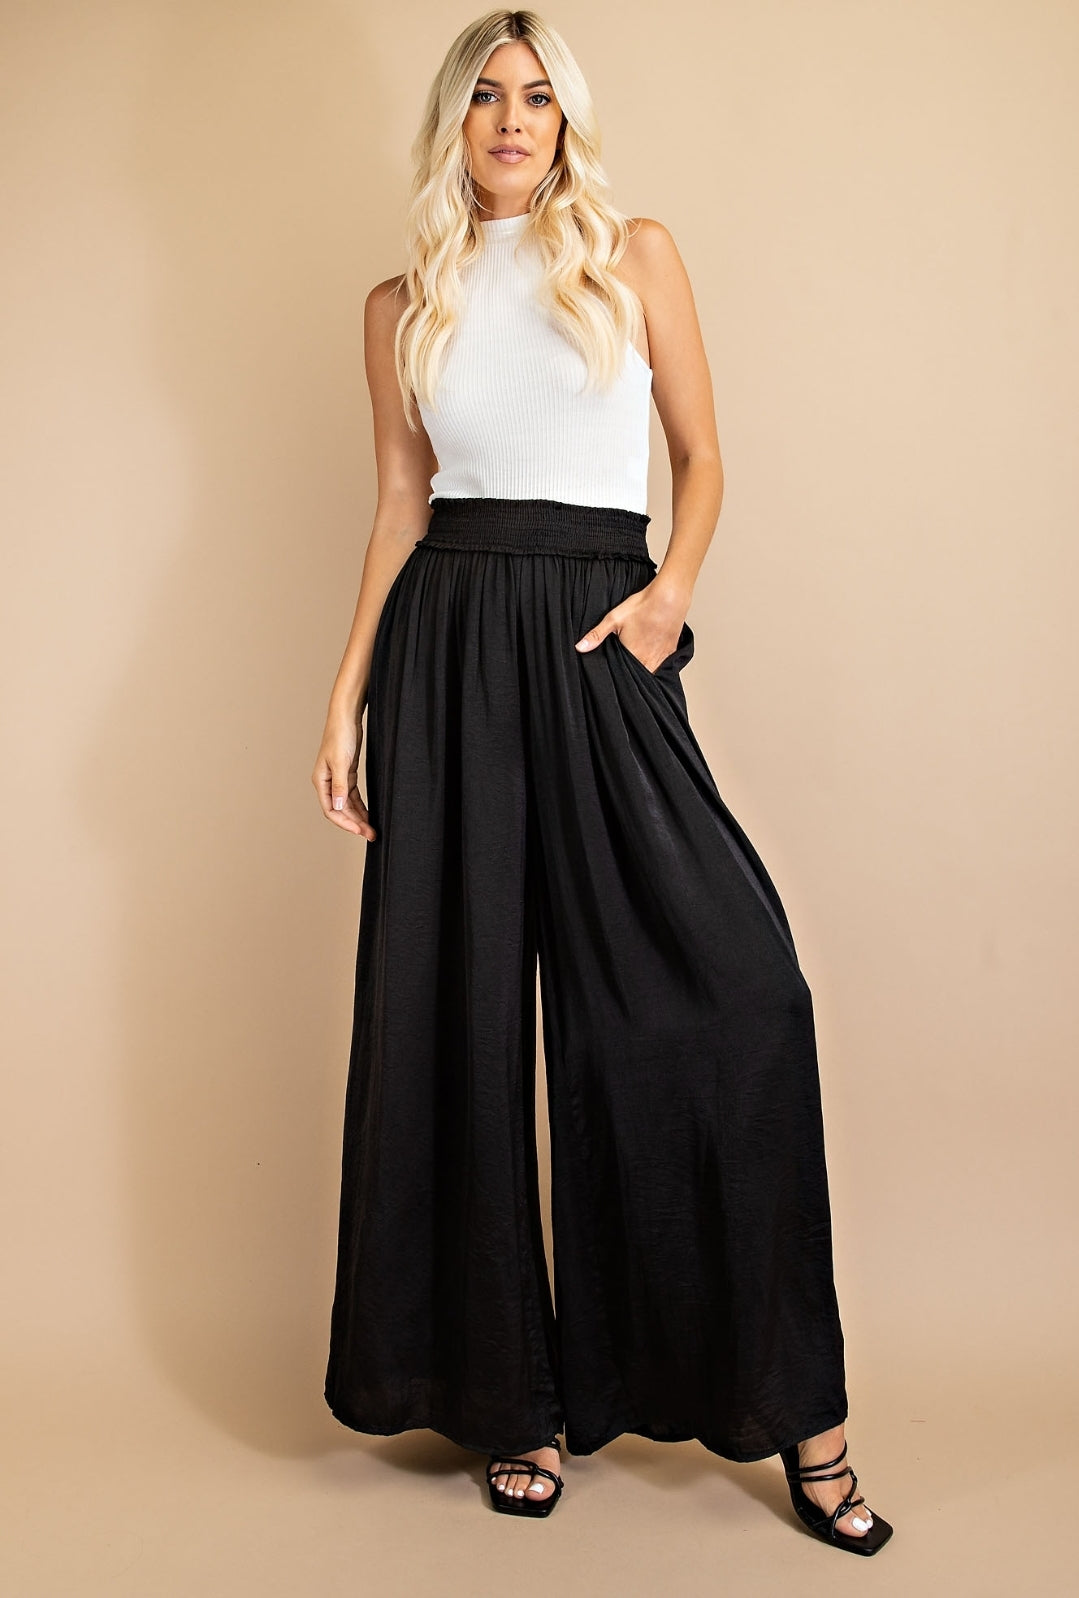 Palazzo Pants (Only Large fits 12-18)